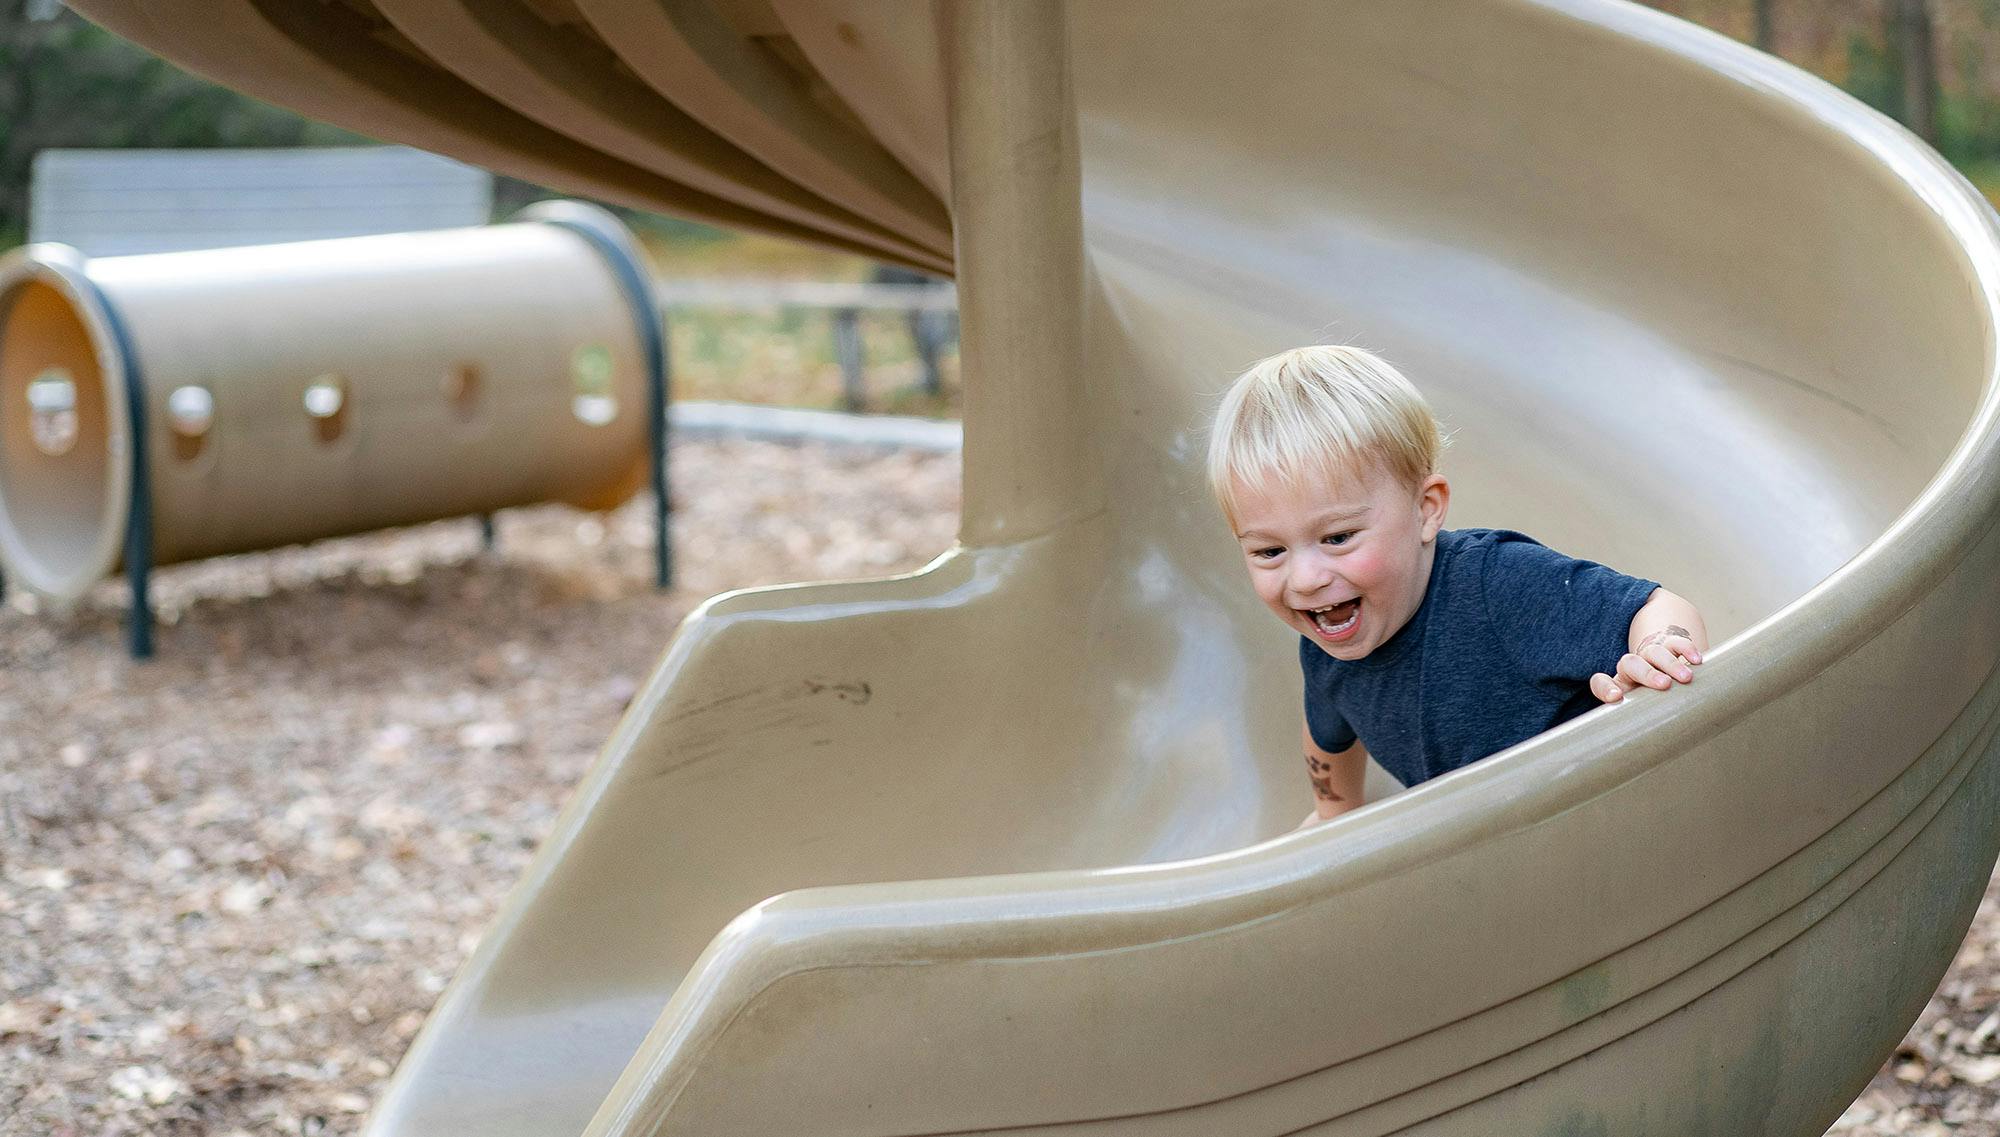 A young boy smiling happily on a slide.